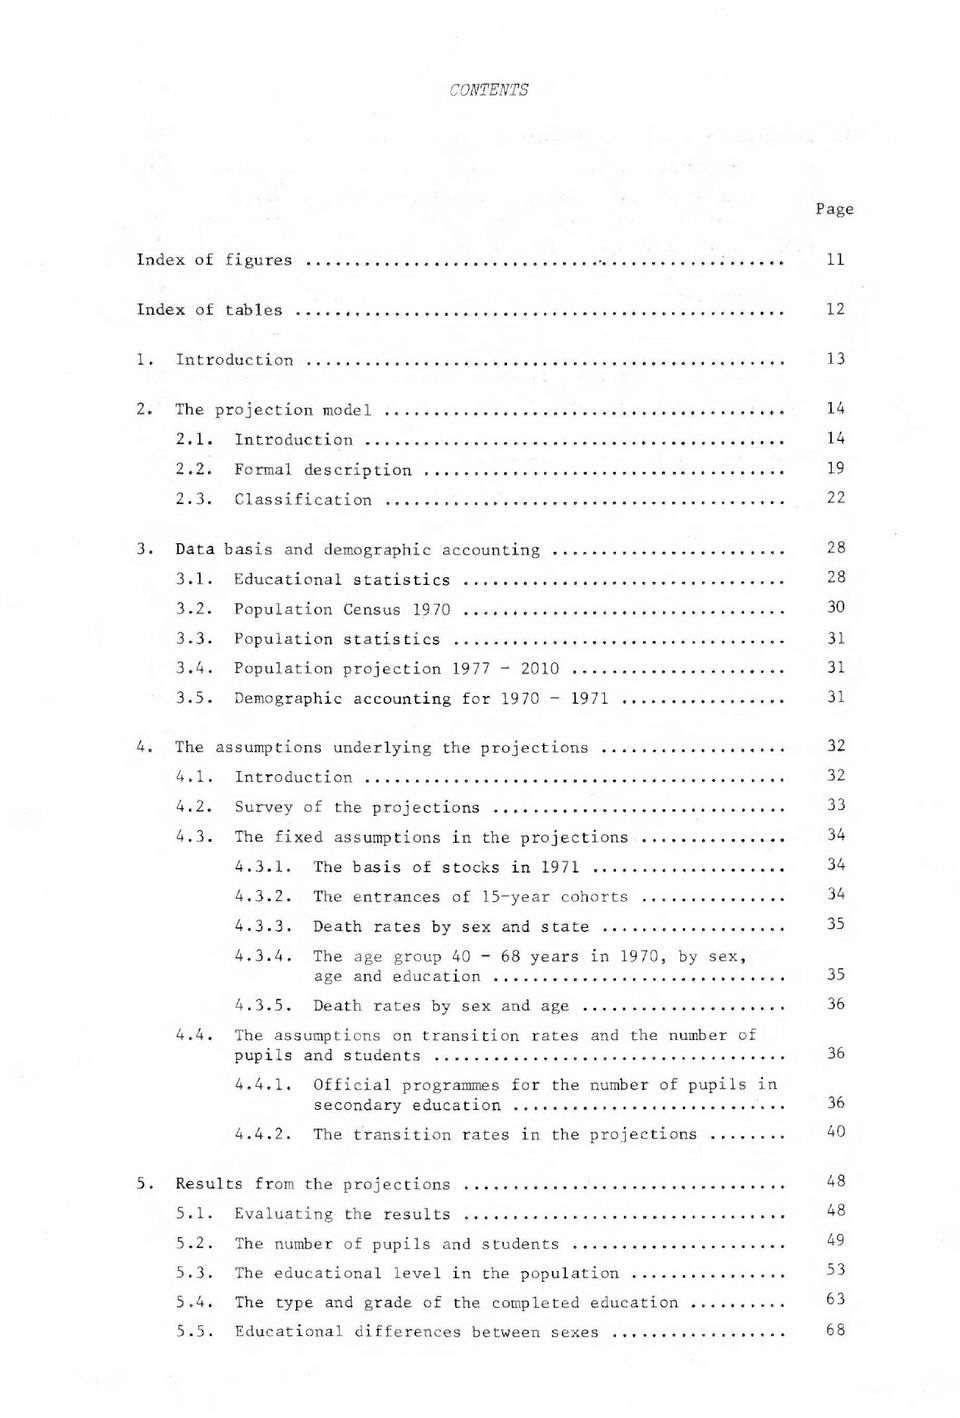 Demographic accounting for 1970-1971 31 4. The assumptions underlying the projections 32 4.1. Introduction 32 4.2. Survey of the projections 33 4.3. The fixed assumptions in the projections 34 4.3.1. The basis of stocks in 1971 34 4.